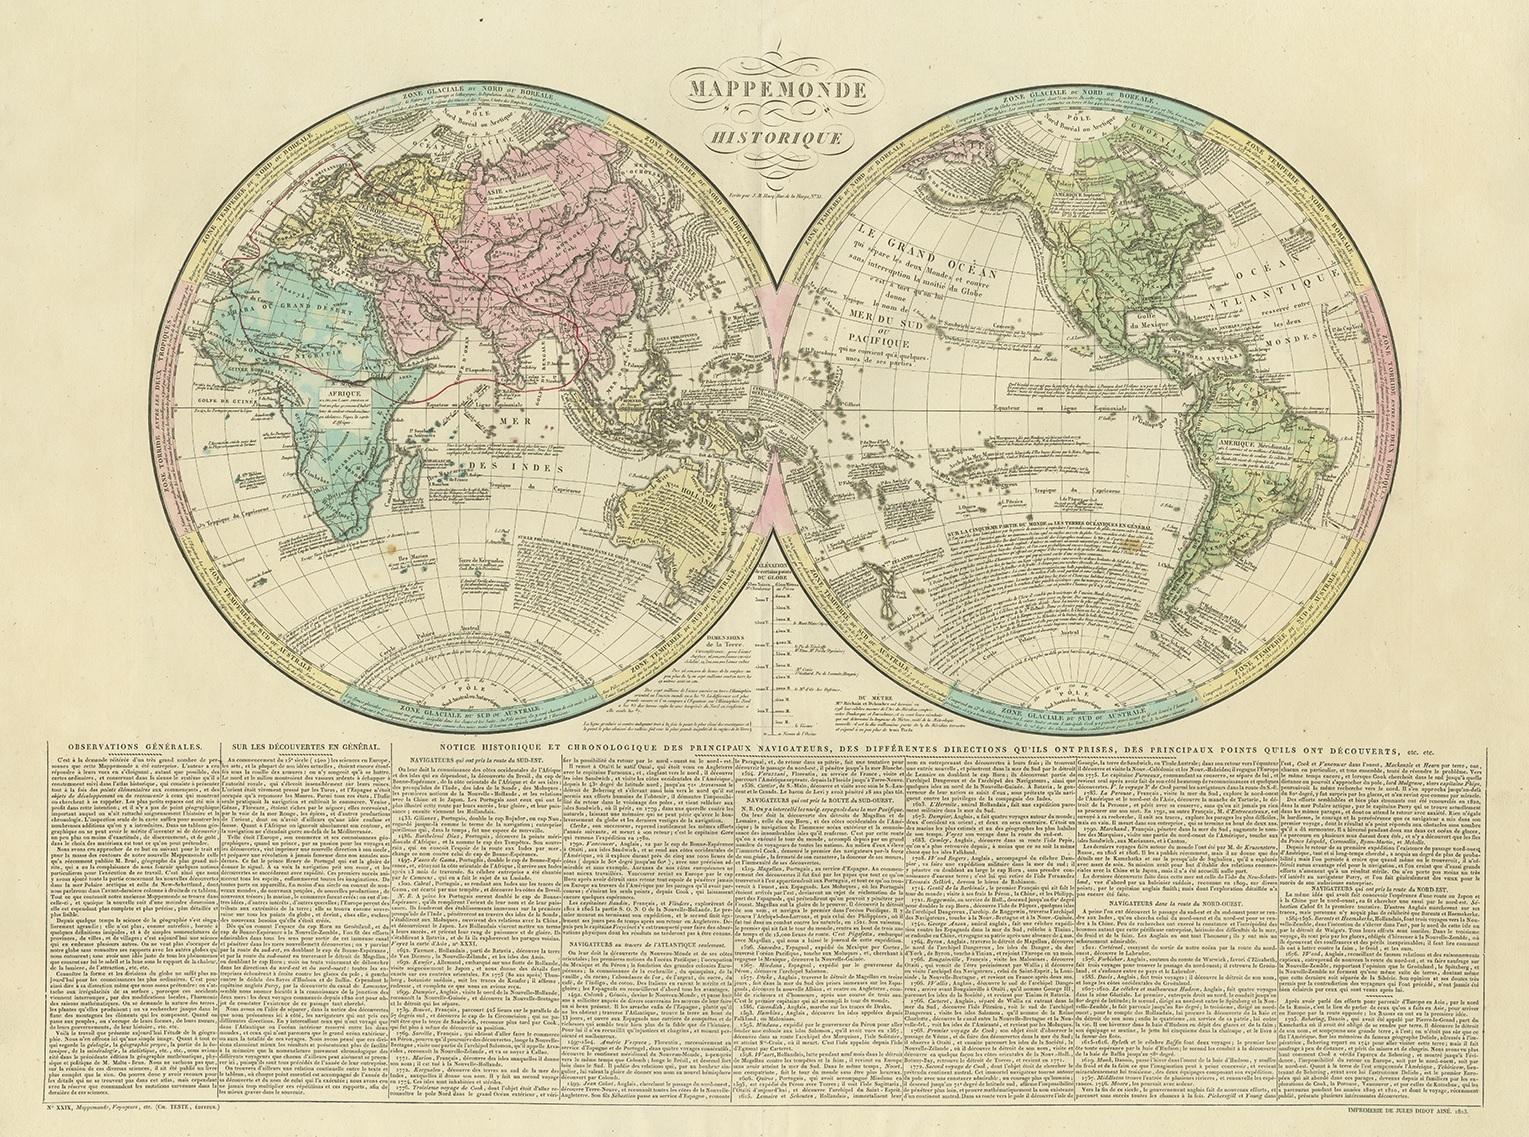 Antique world map titled 'Mappe Monde Historique'. The map depicts both the Eastern and Western Hemispheres, with the hemispheres meeting in the middle of the Pacific Ocean near the Solomon Islands. Features commentary on world affairs - including